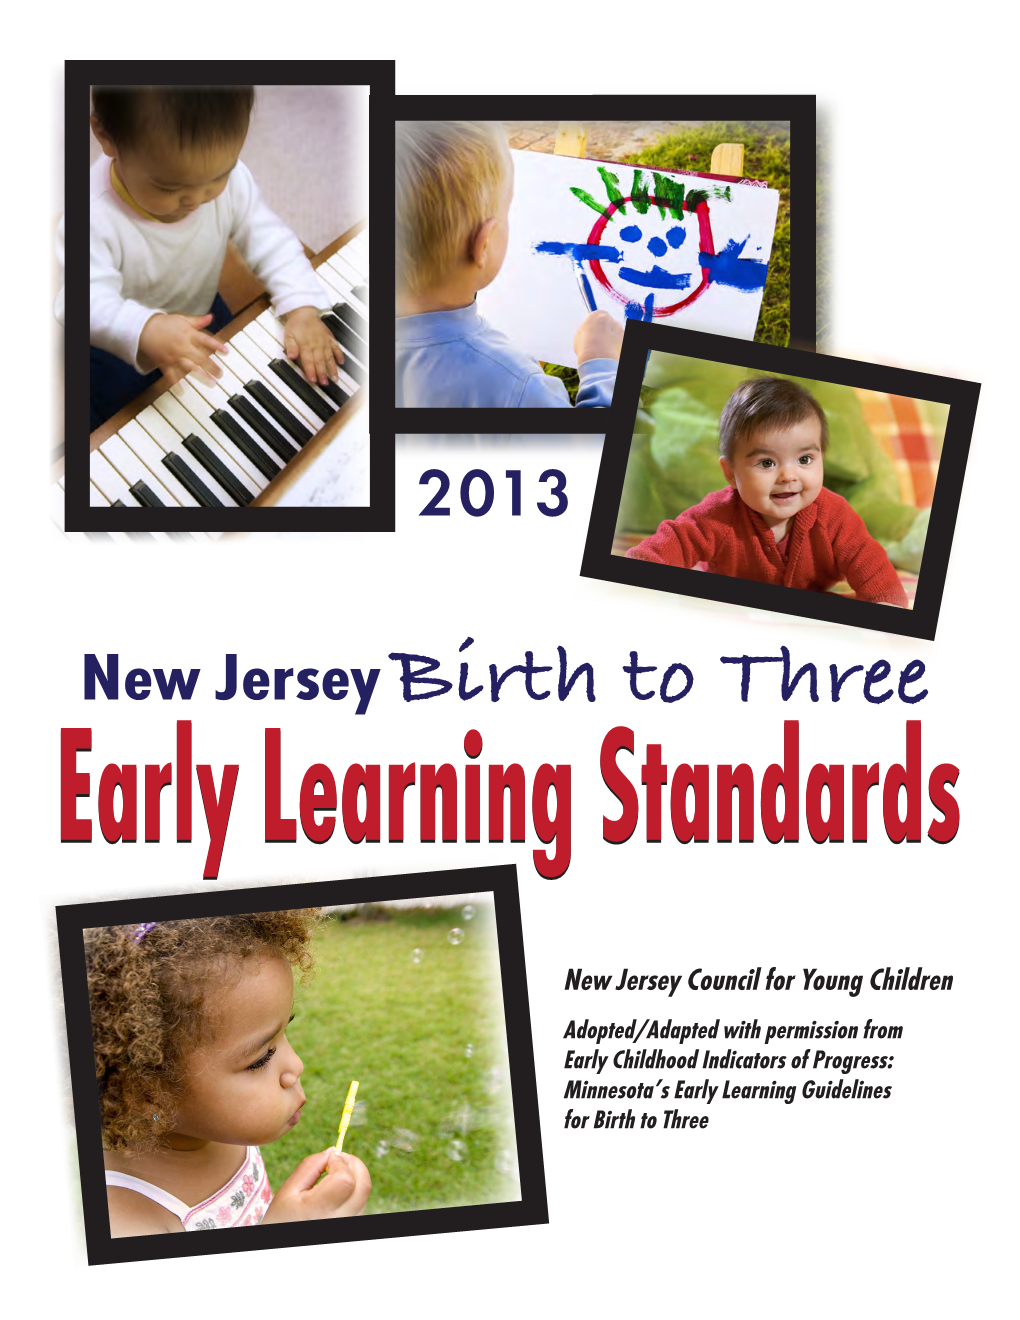 New Jersey Birth to Three Early Learning Standards